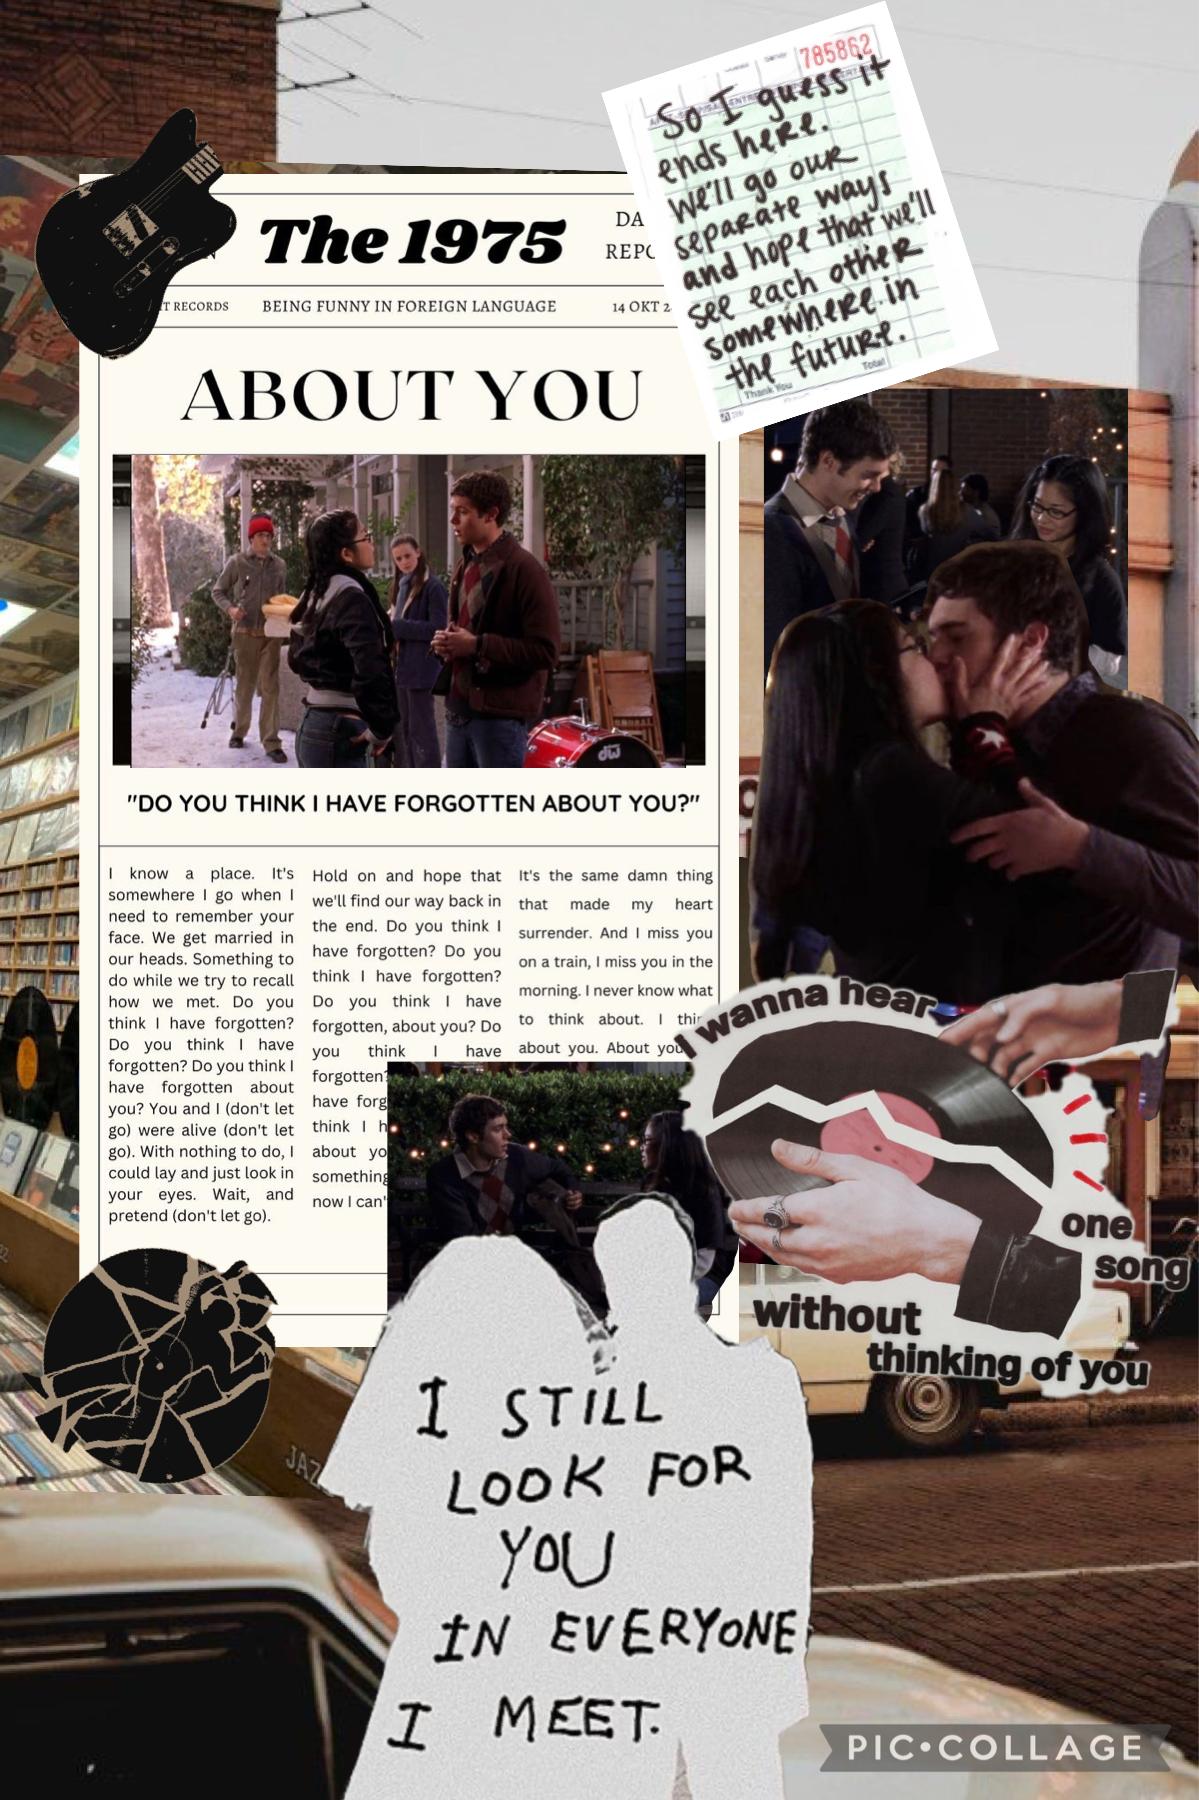 🤠 Gilmore Girls 🤠
The ship no one talks about 🥺🥲 my heart literally broke when they were over, I full heartedly believe they should have been end game!!!